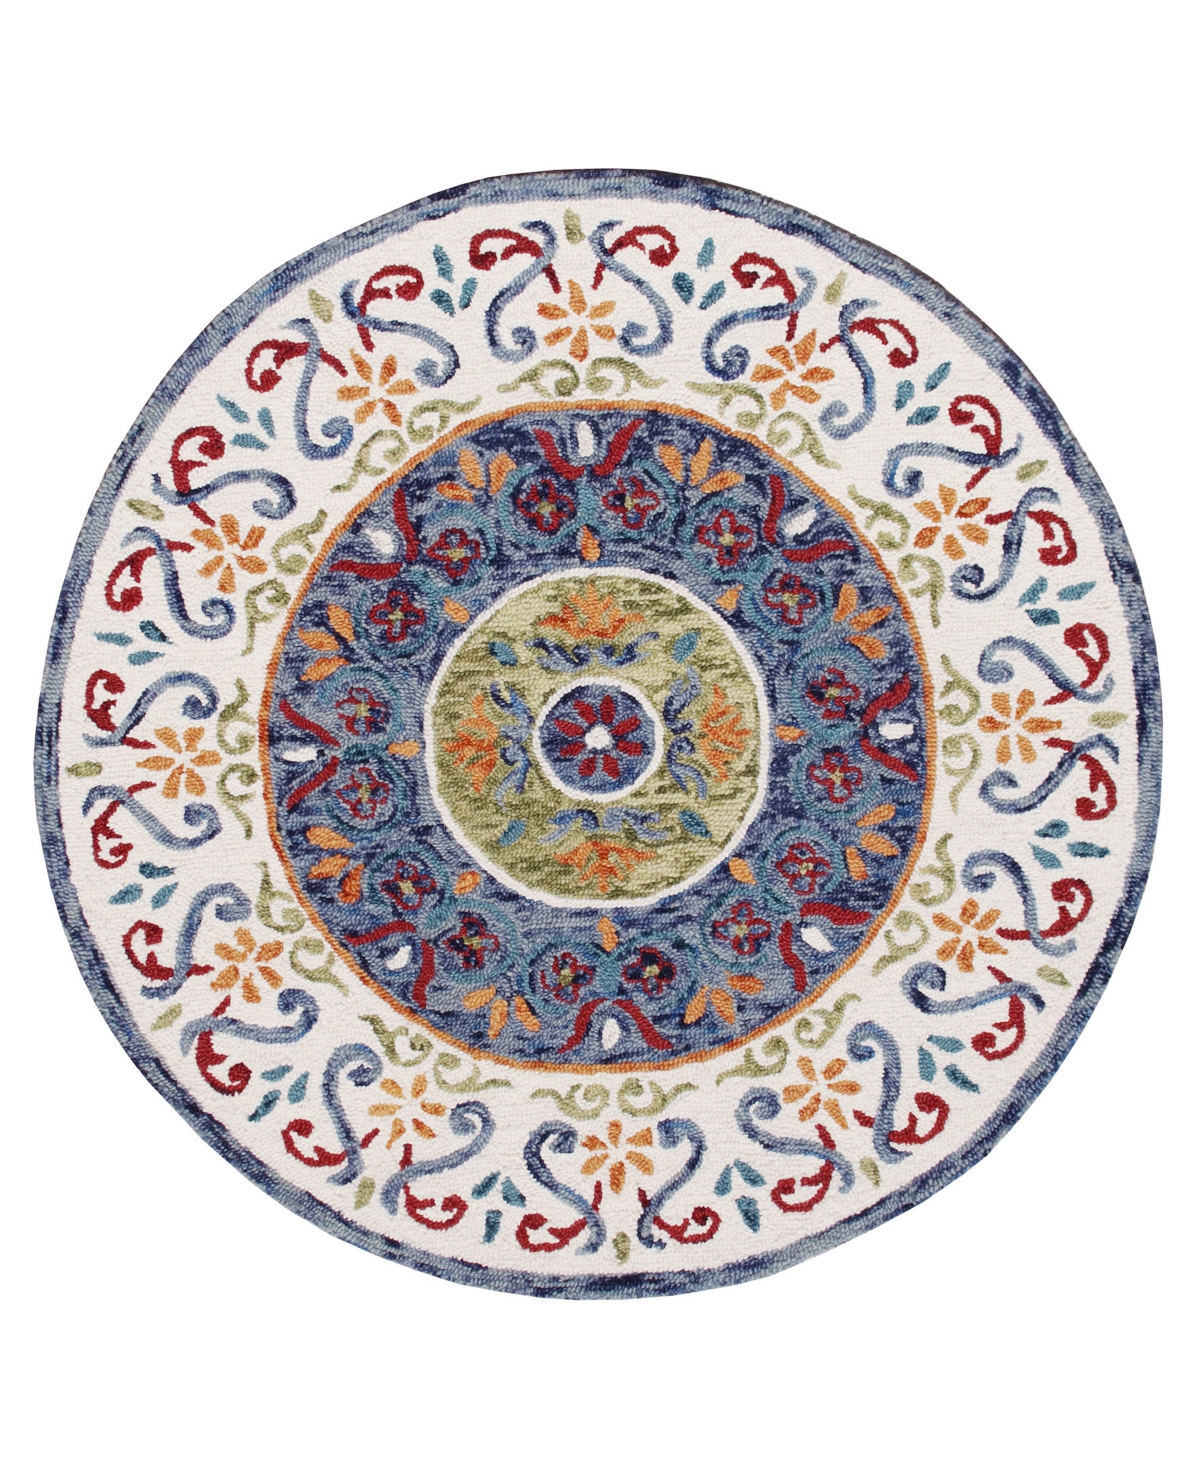 Lr Home Sweet SINUO54155 6' x 6' Round Area Rug - White